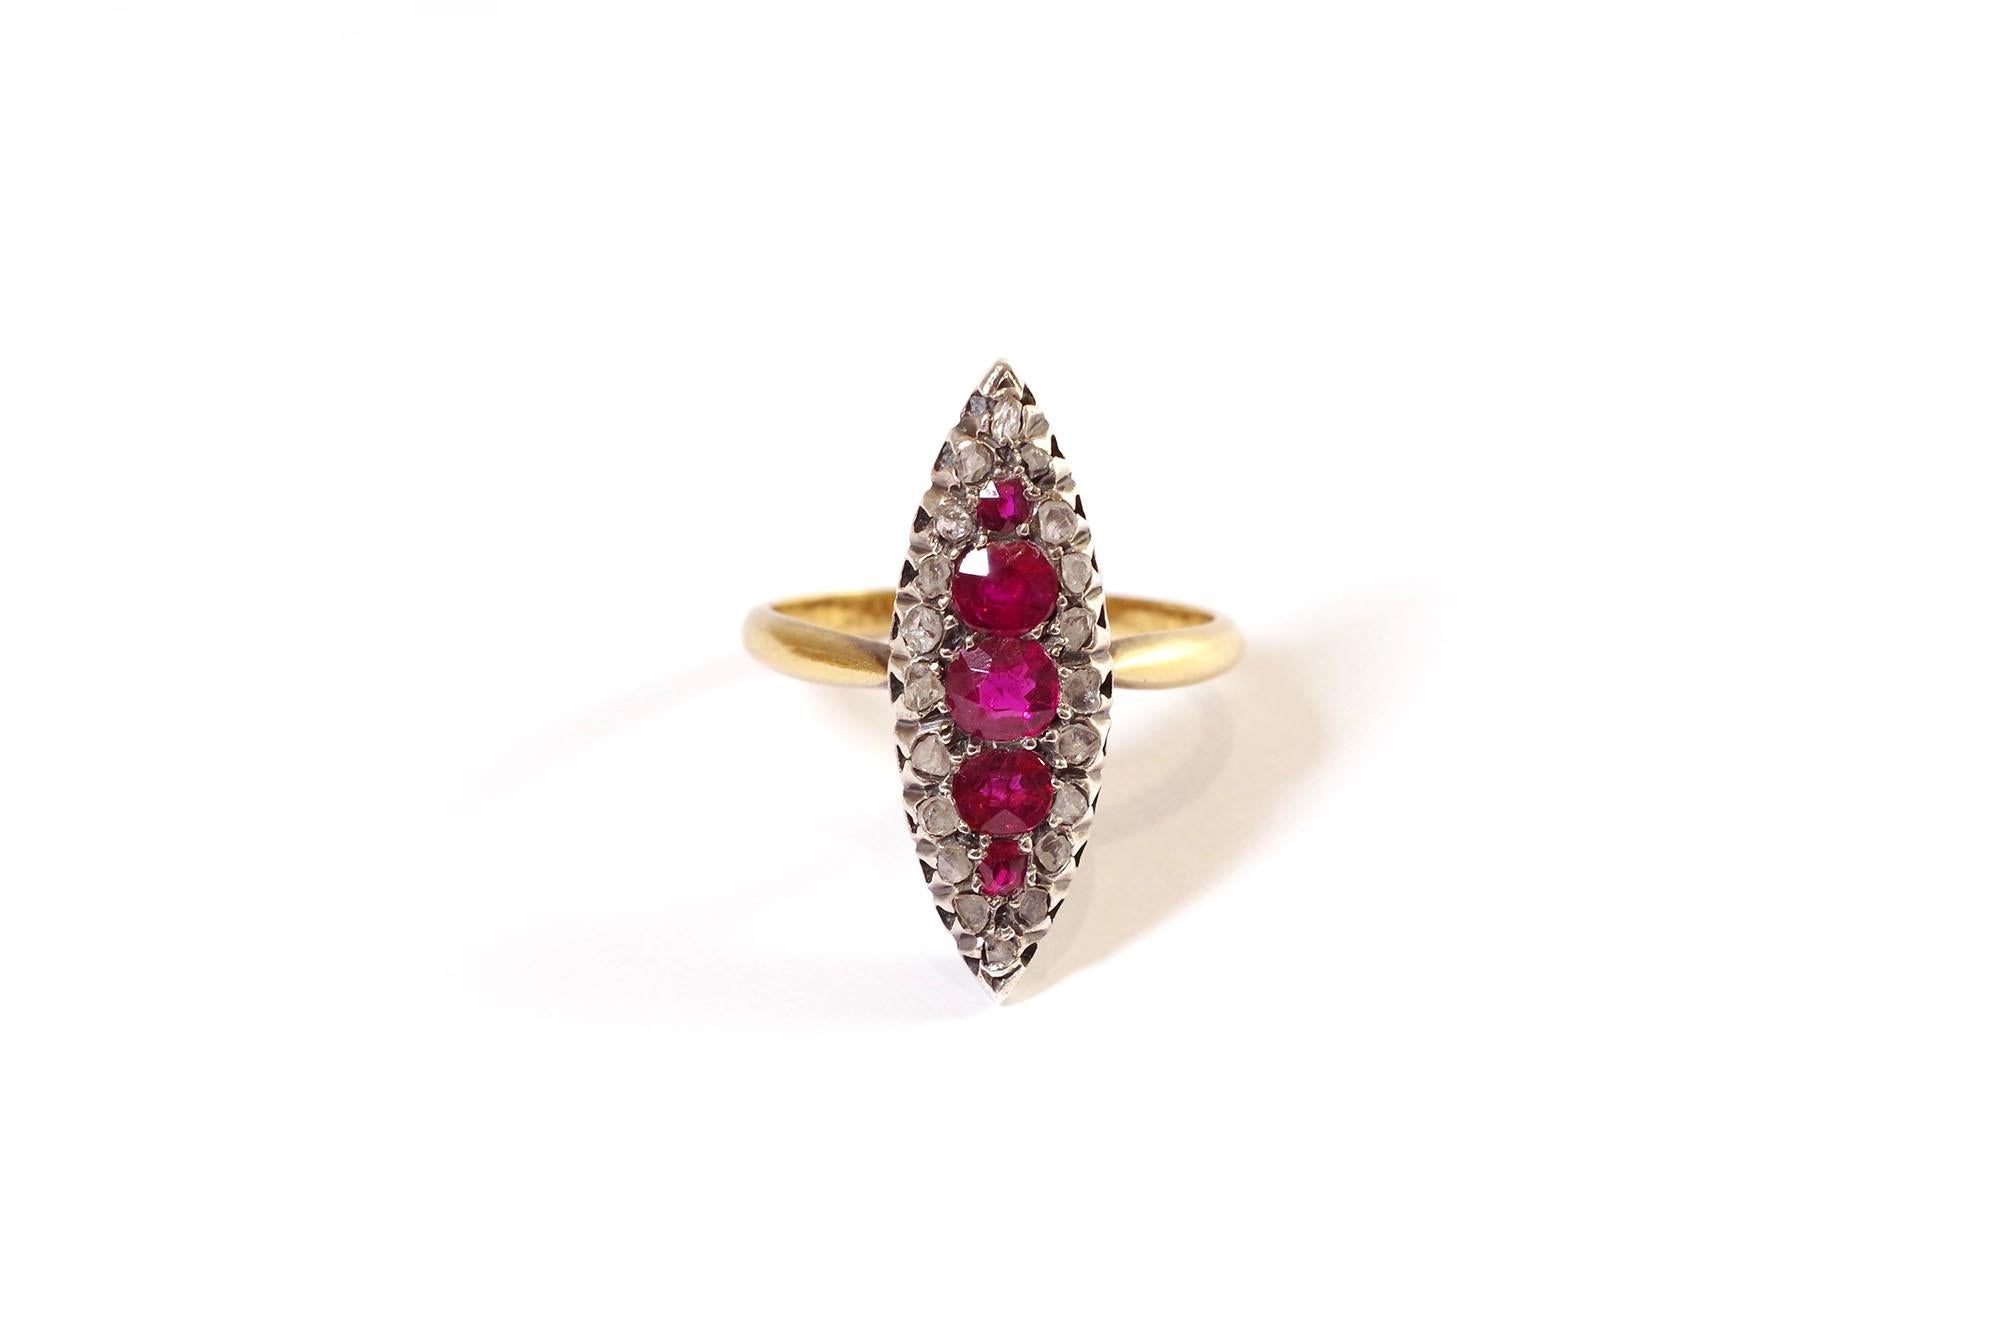 Ruby diamond marquise ring in rose gold 18 karats and silver. Antique ring centred by a line of five natural rubies of round and oval cut, the most important weighing approximately 0,38 carat. The rubies are surrounded by twenty flat rose-cut